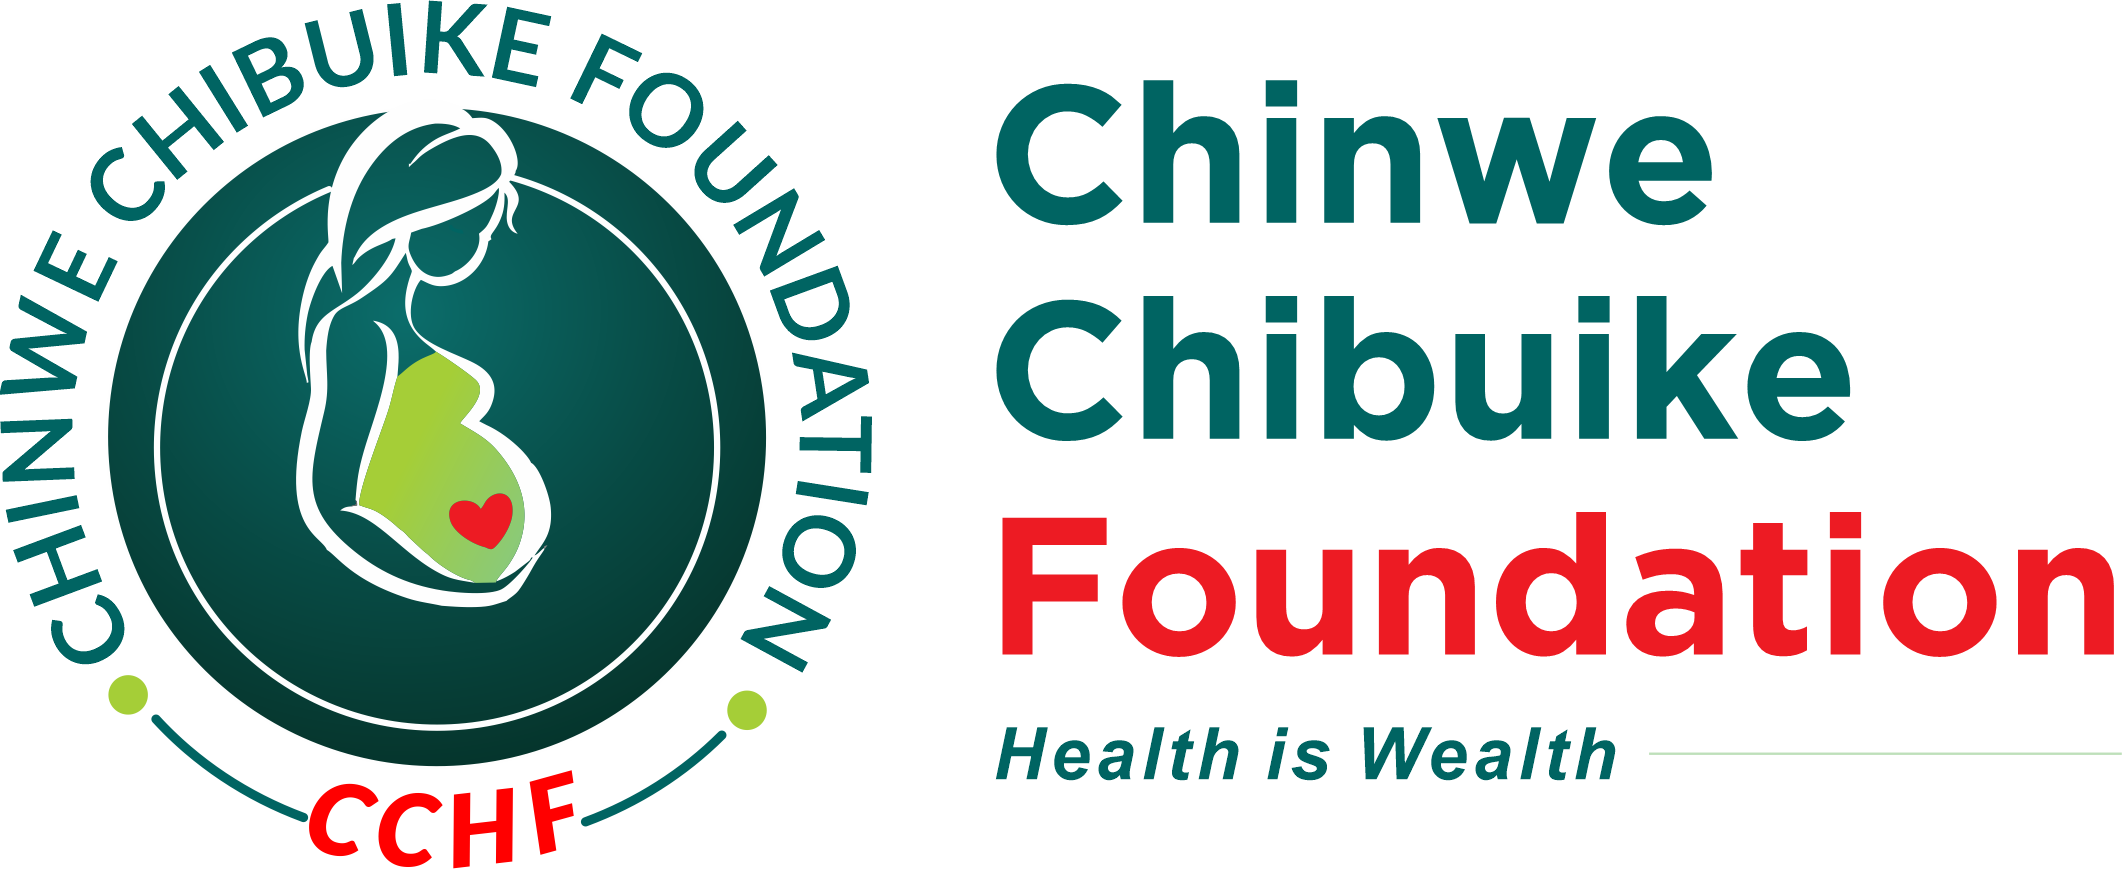 CCH Foundation